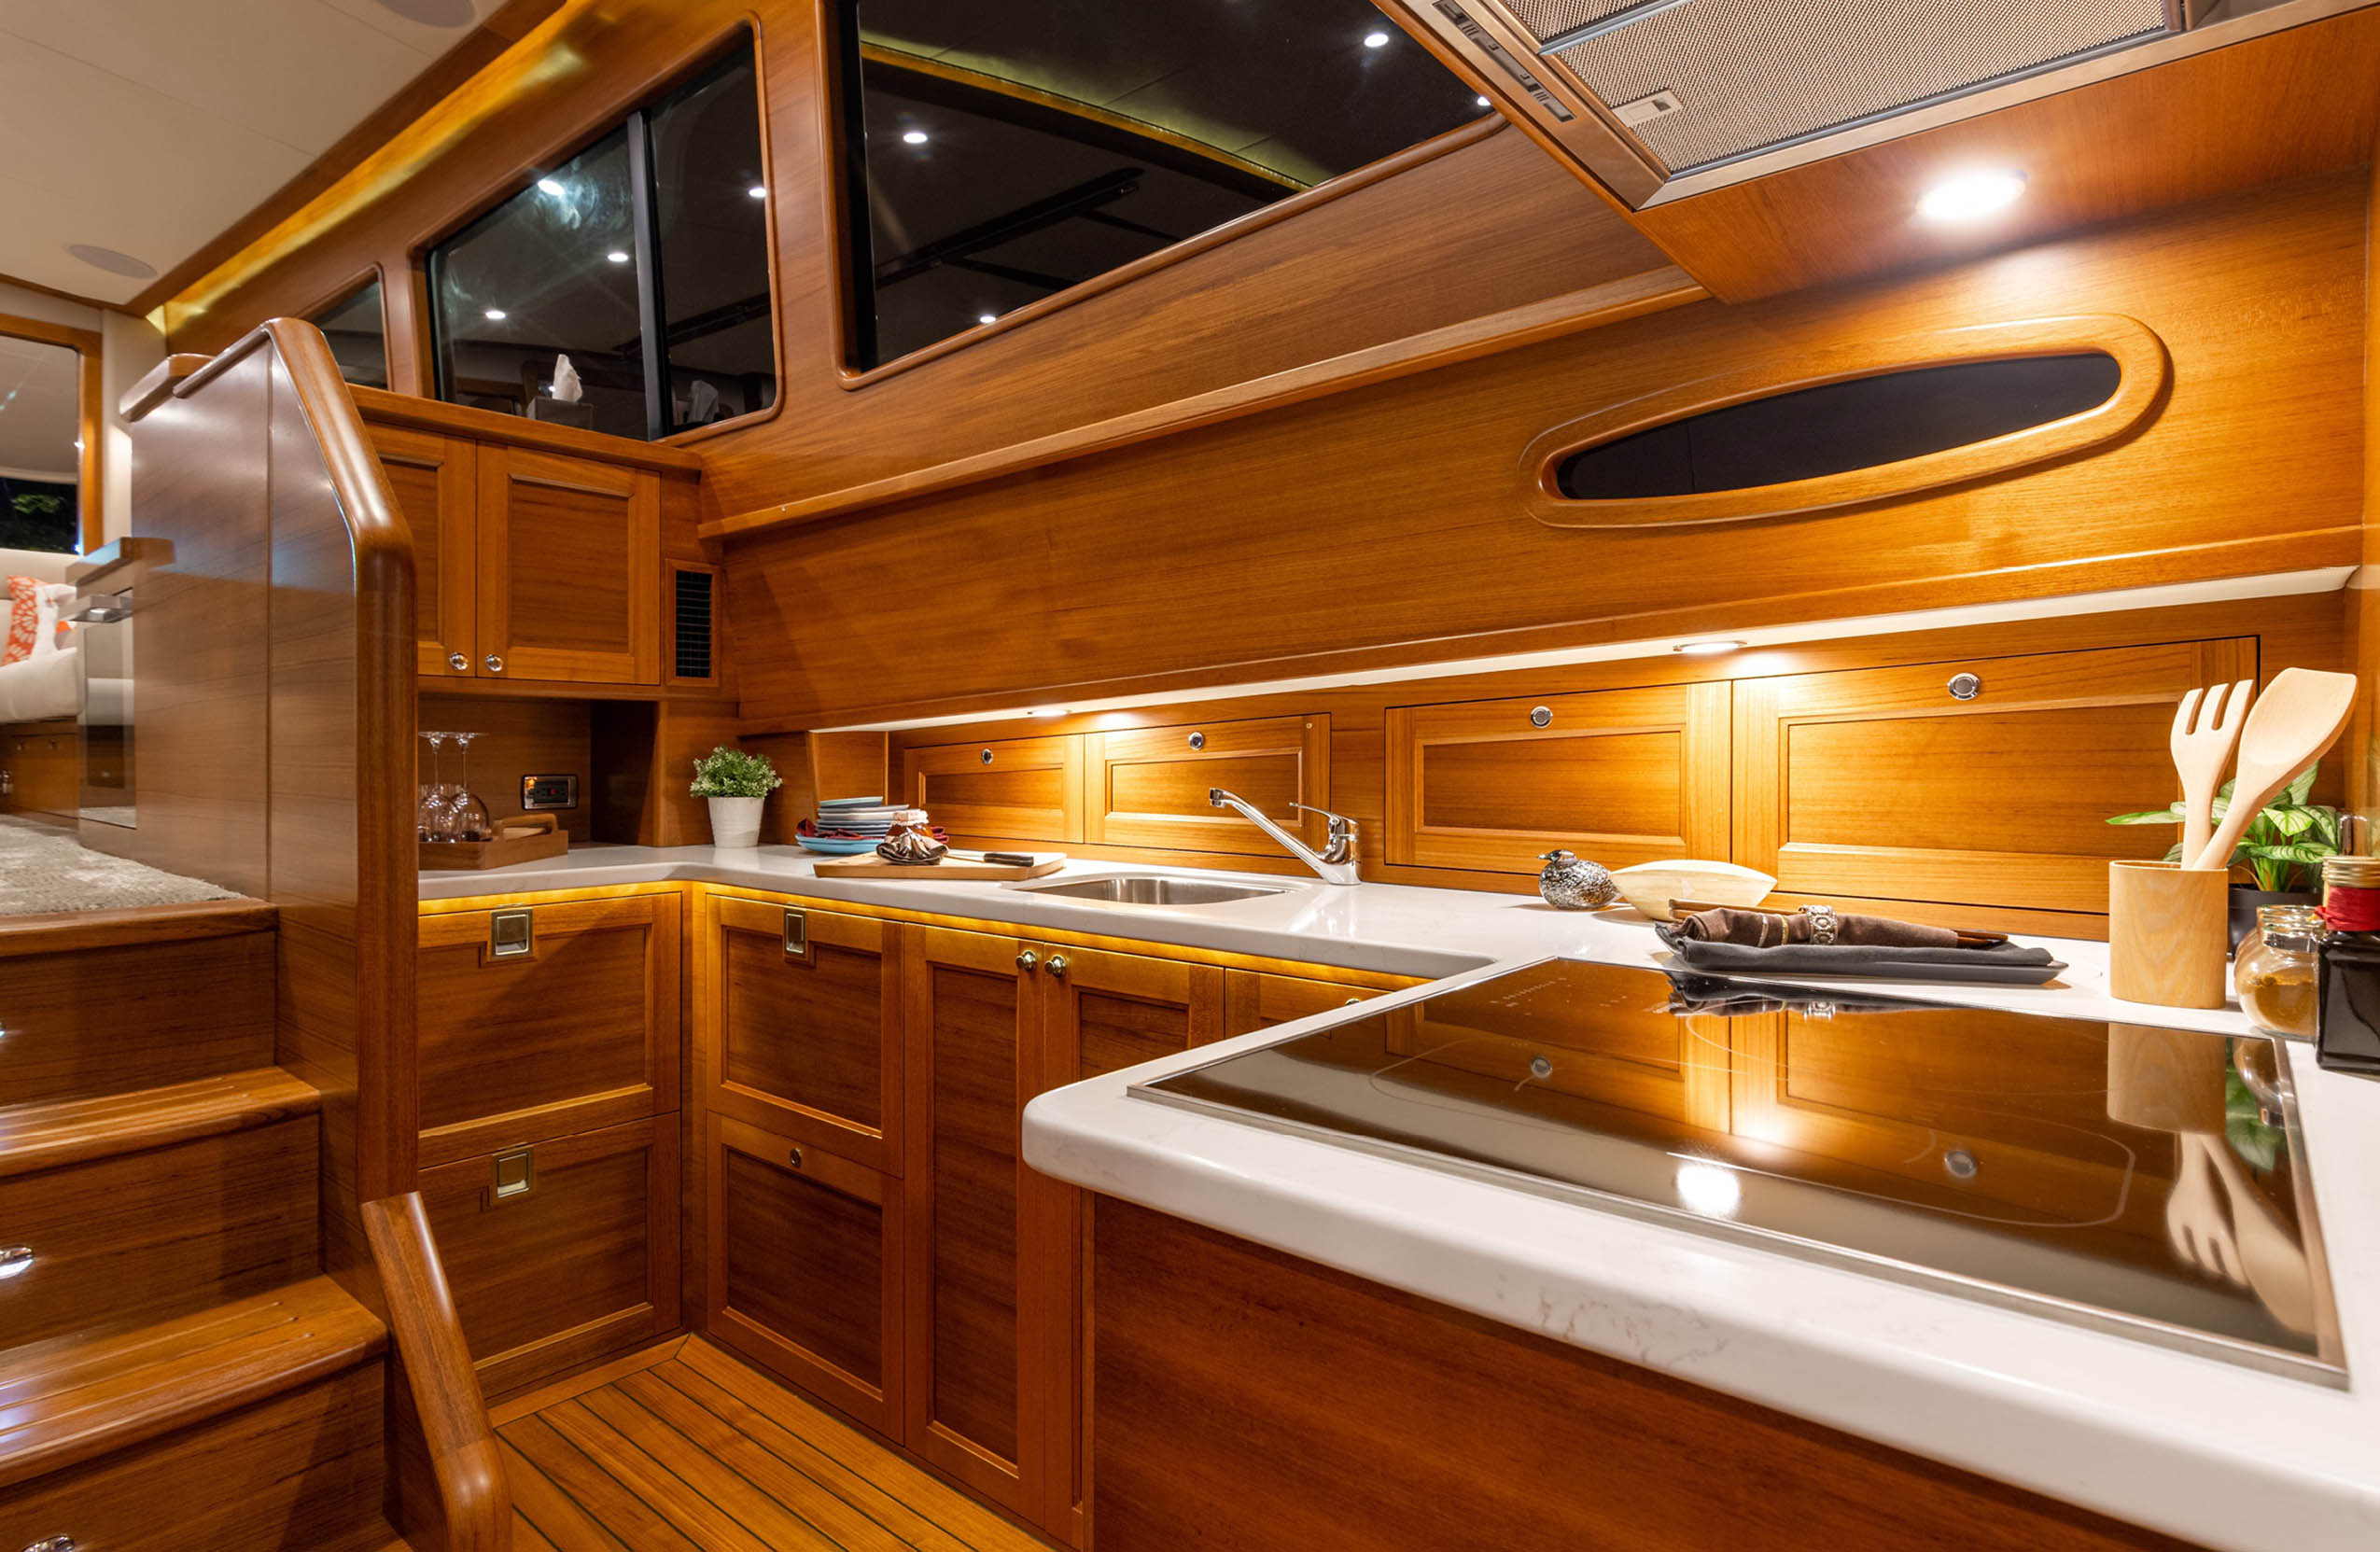 Grand Banks 54 interior showing cabinets and storage spaces for liveaboards